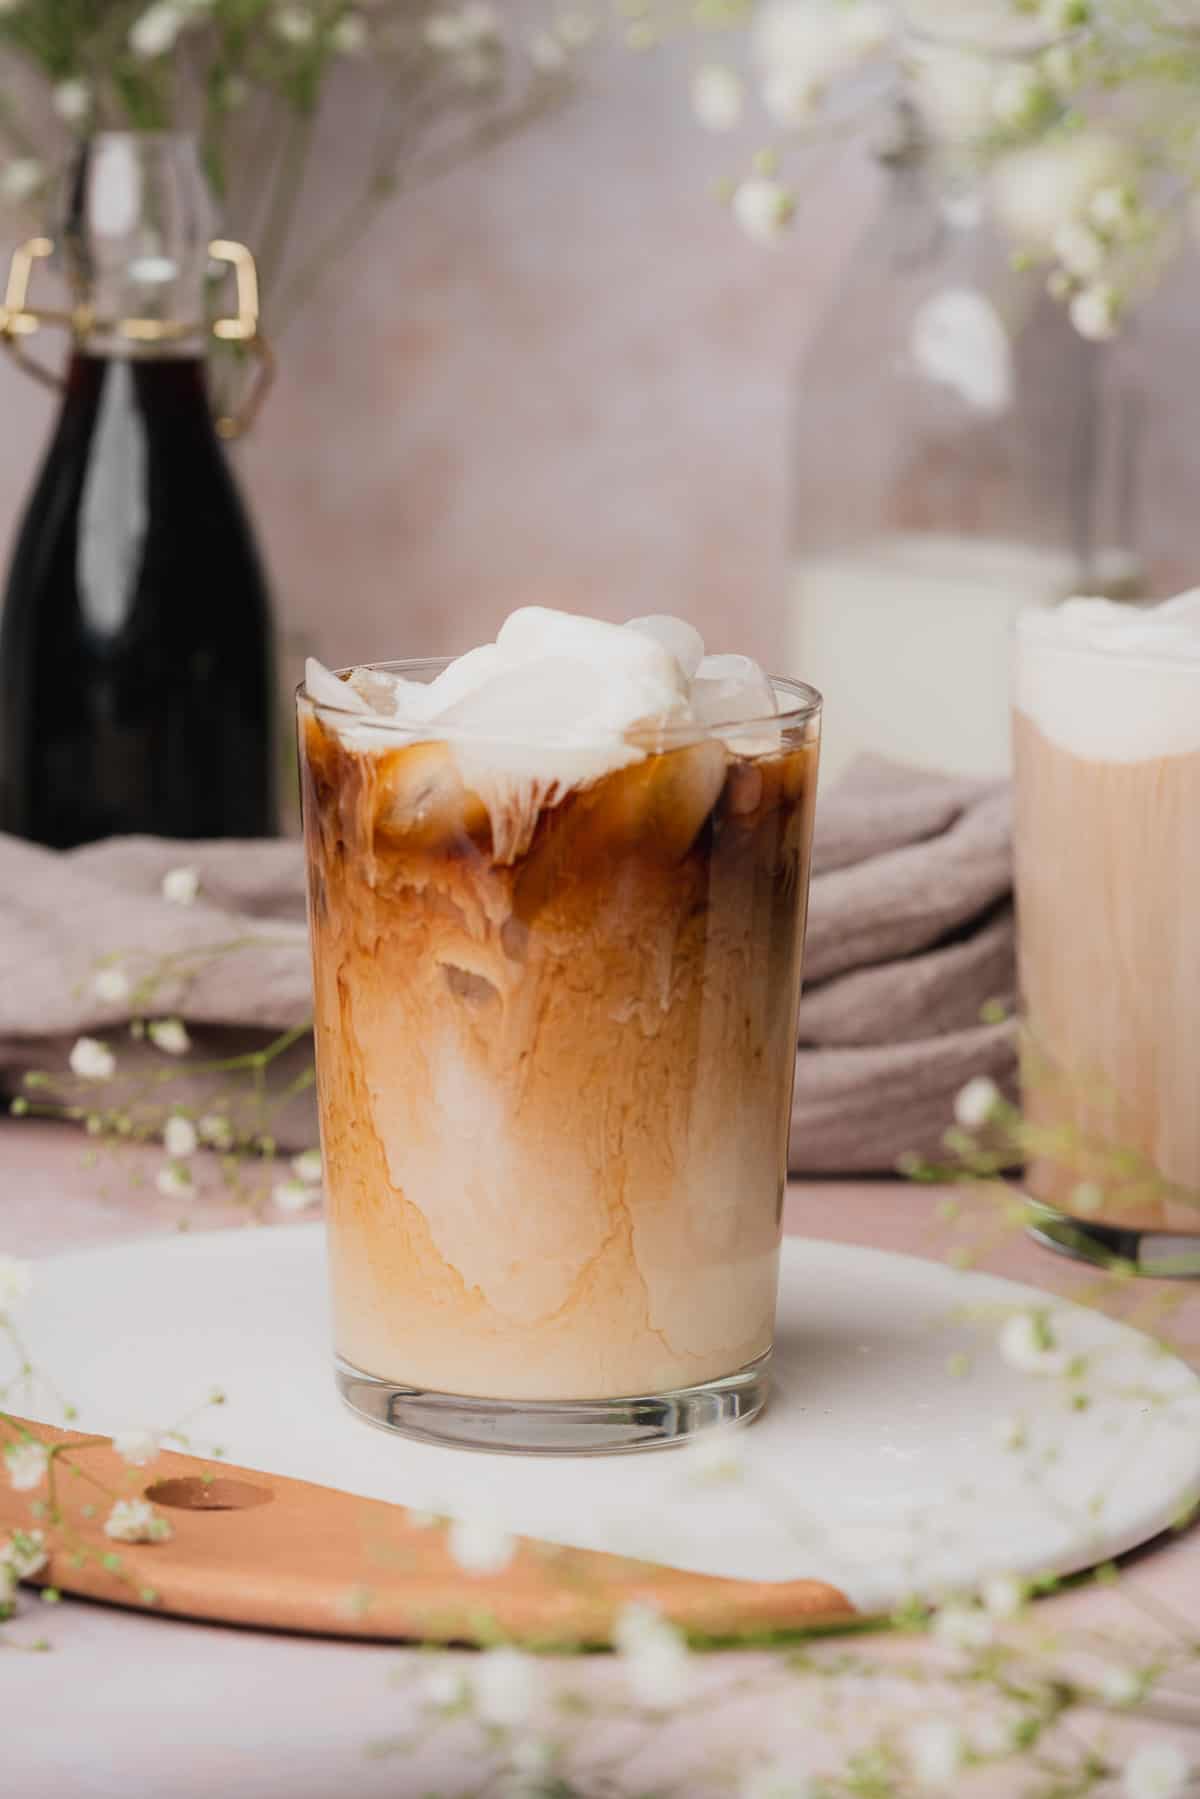 photo of an iced sweet cream cold foam coffee surrounded by small white baby's breath flowers and coffee in the background.